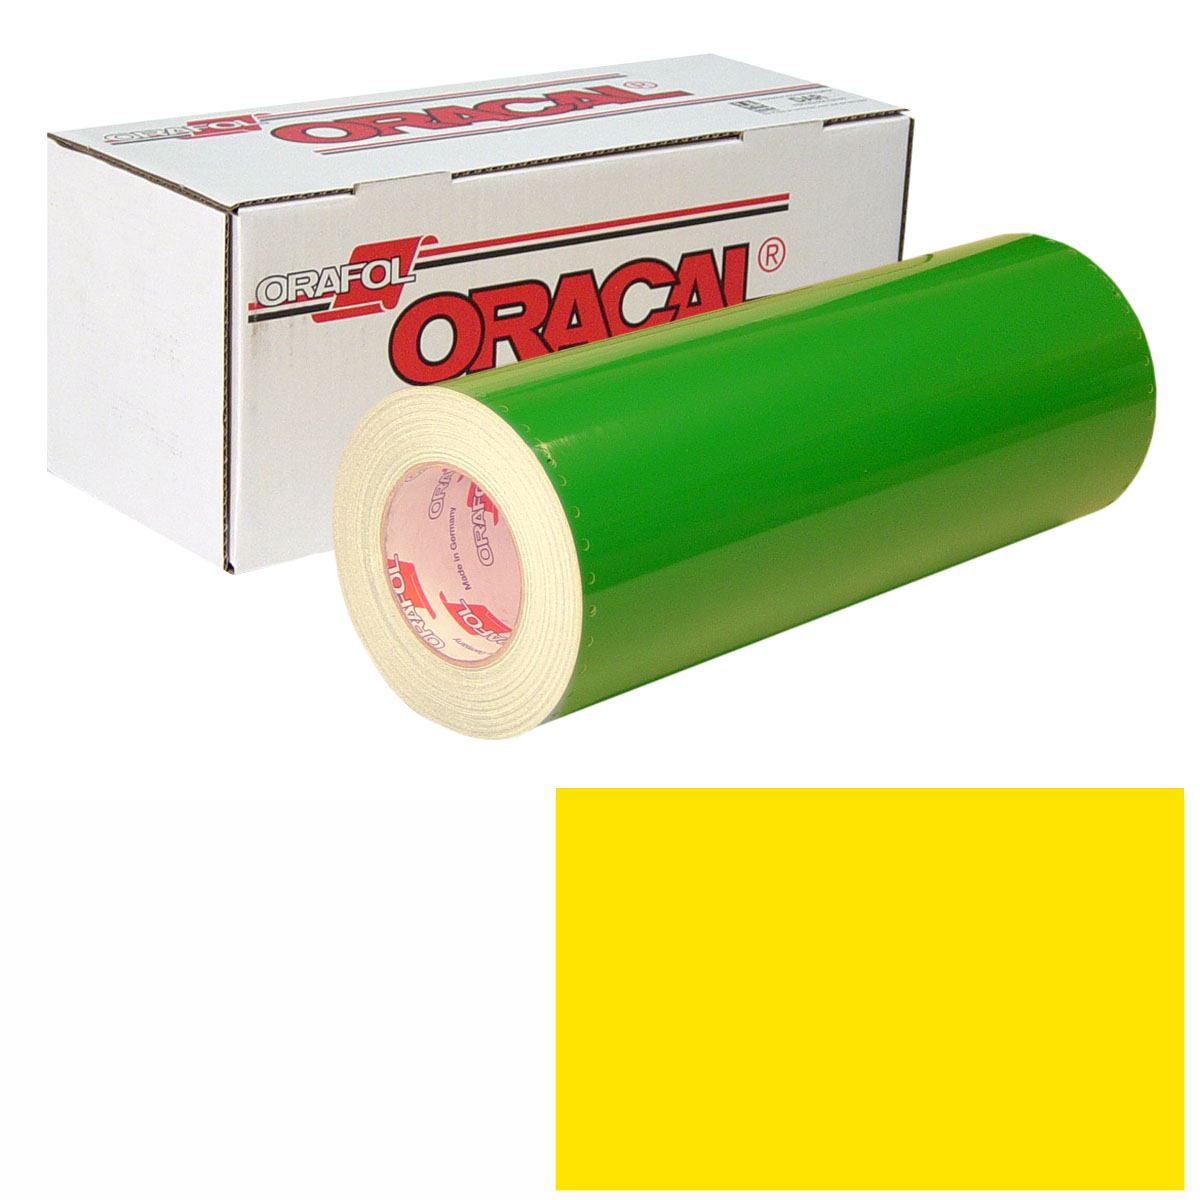 ORACAL 651 30in X 10yd 022 Light Yellow